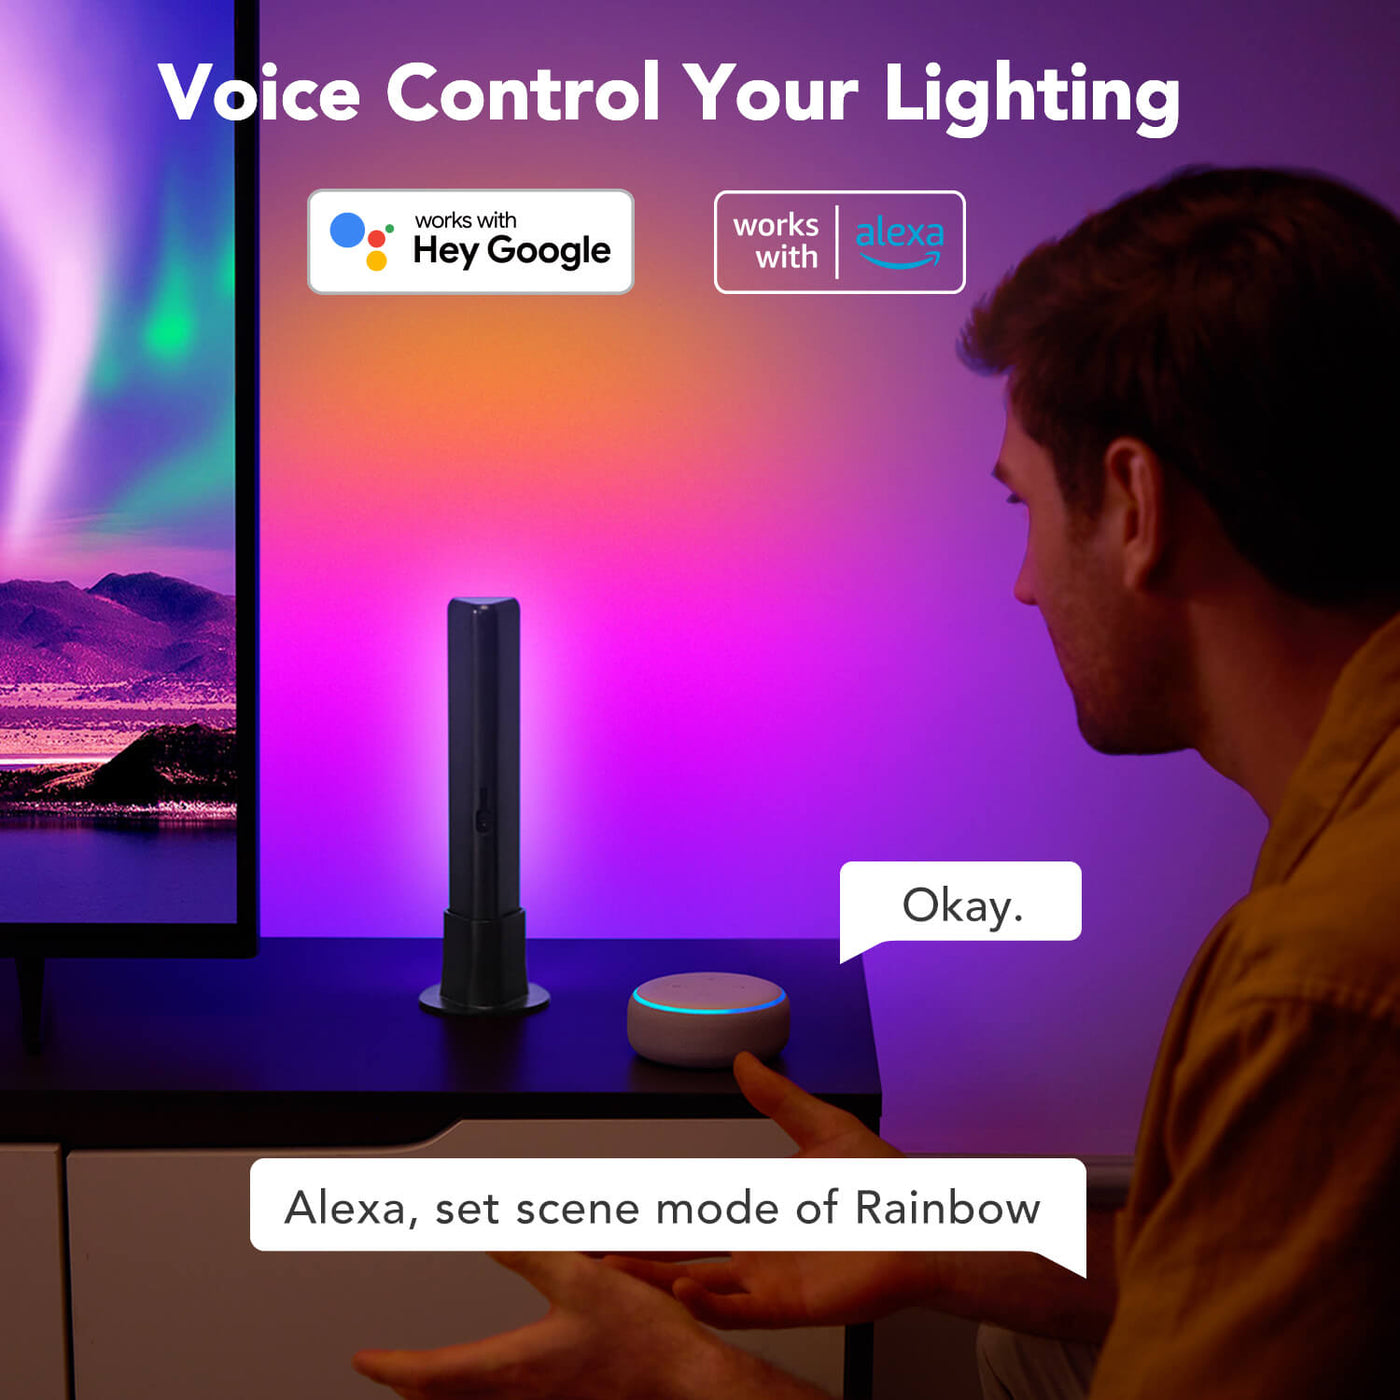 Voice Control Your Lighting